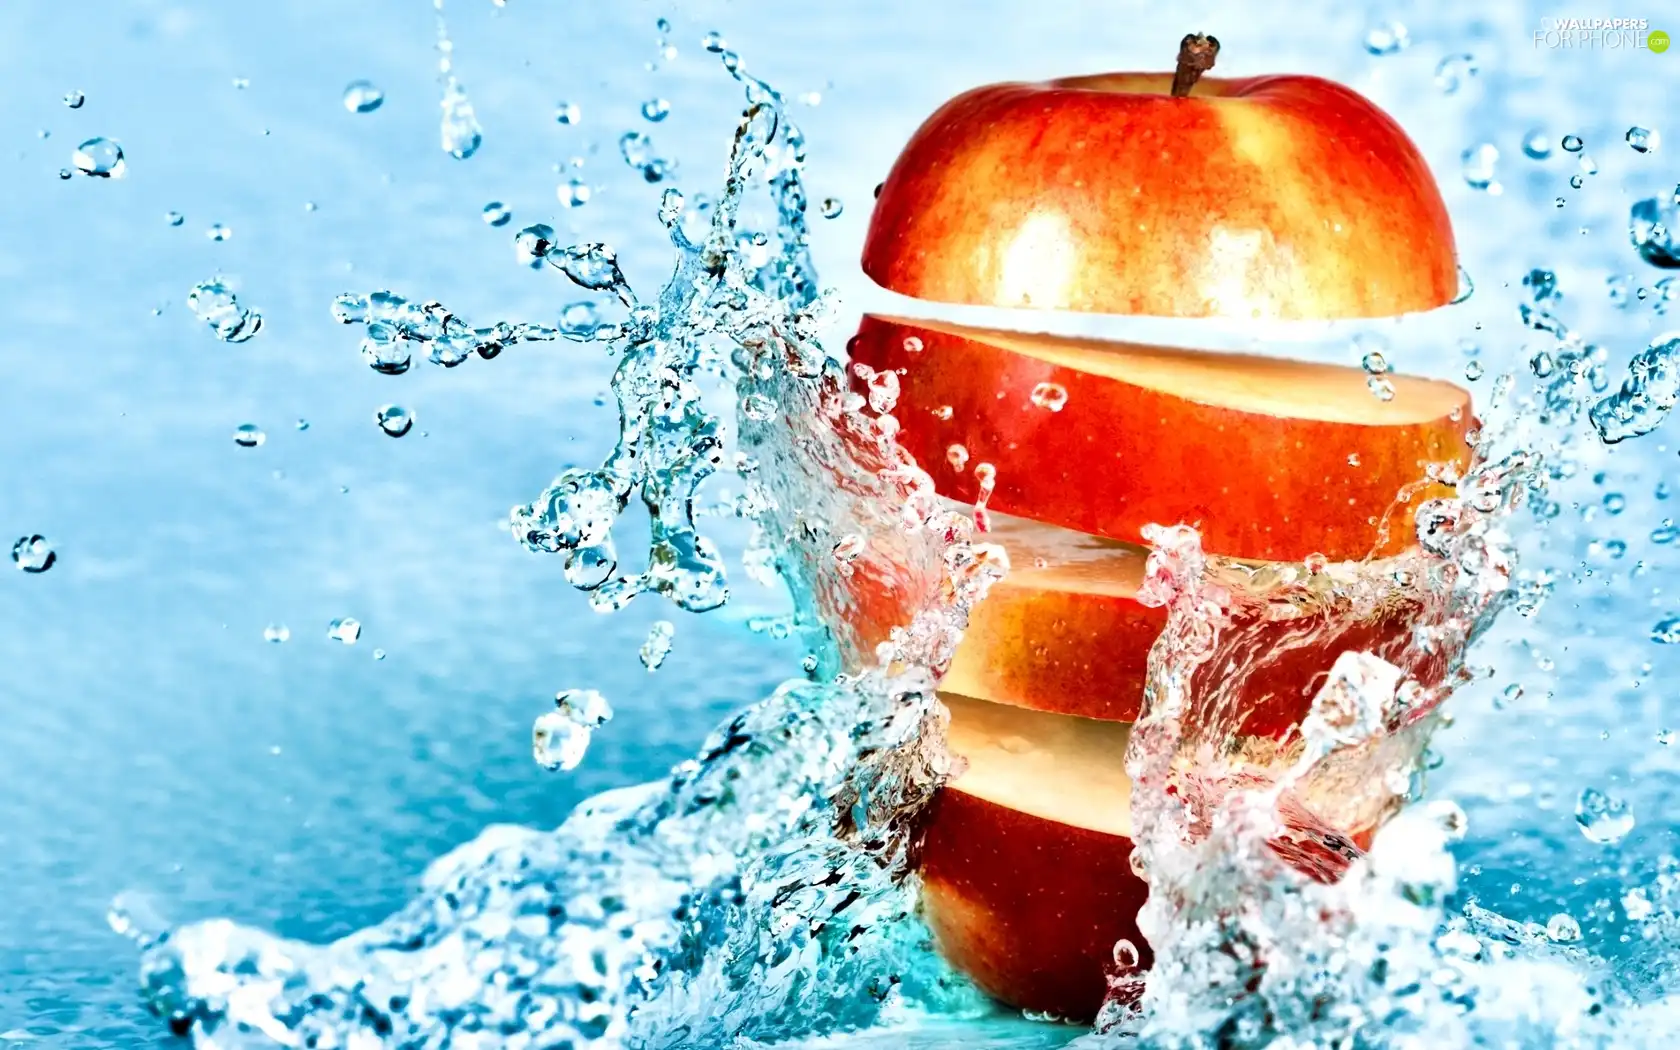 water, Apple, slices - For phone wallpapers: 1680x1050